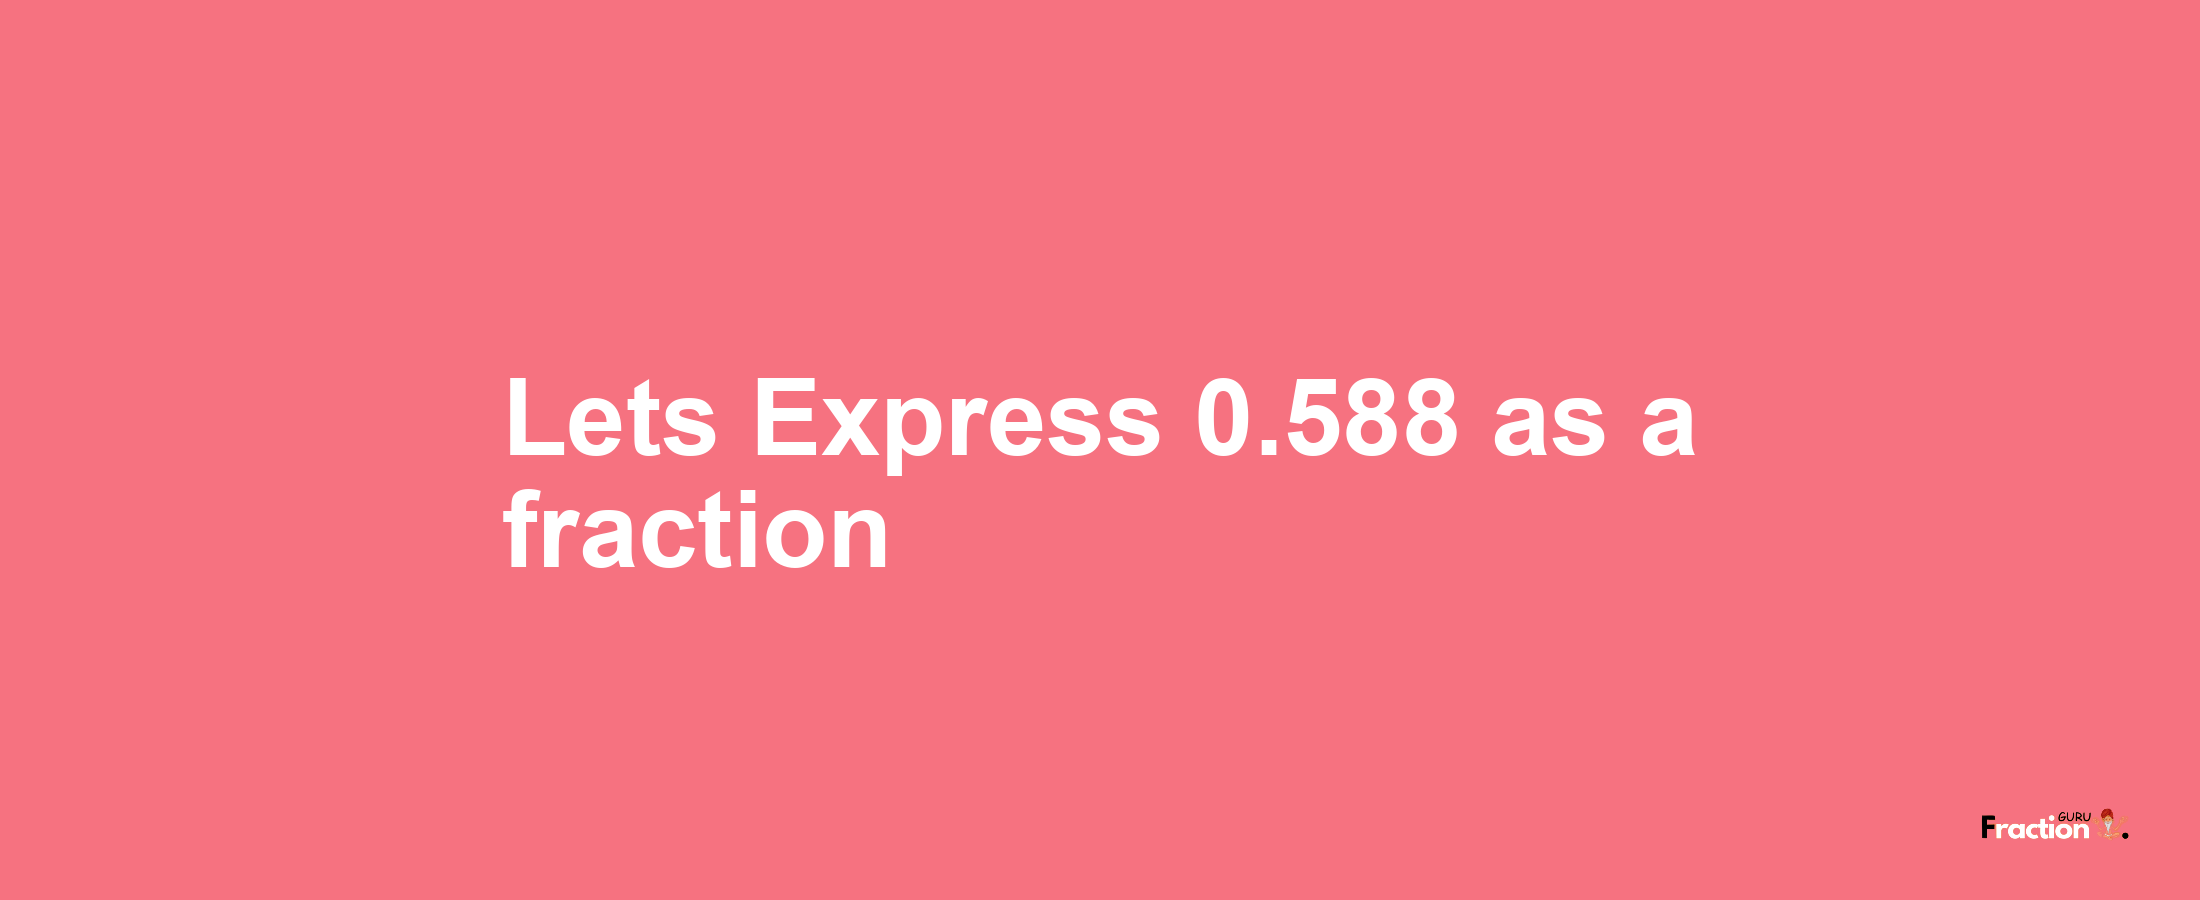 Lets Express 0.588 as afraction